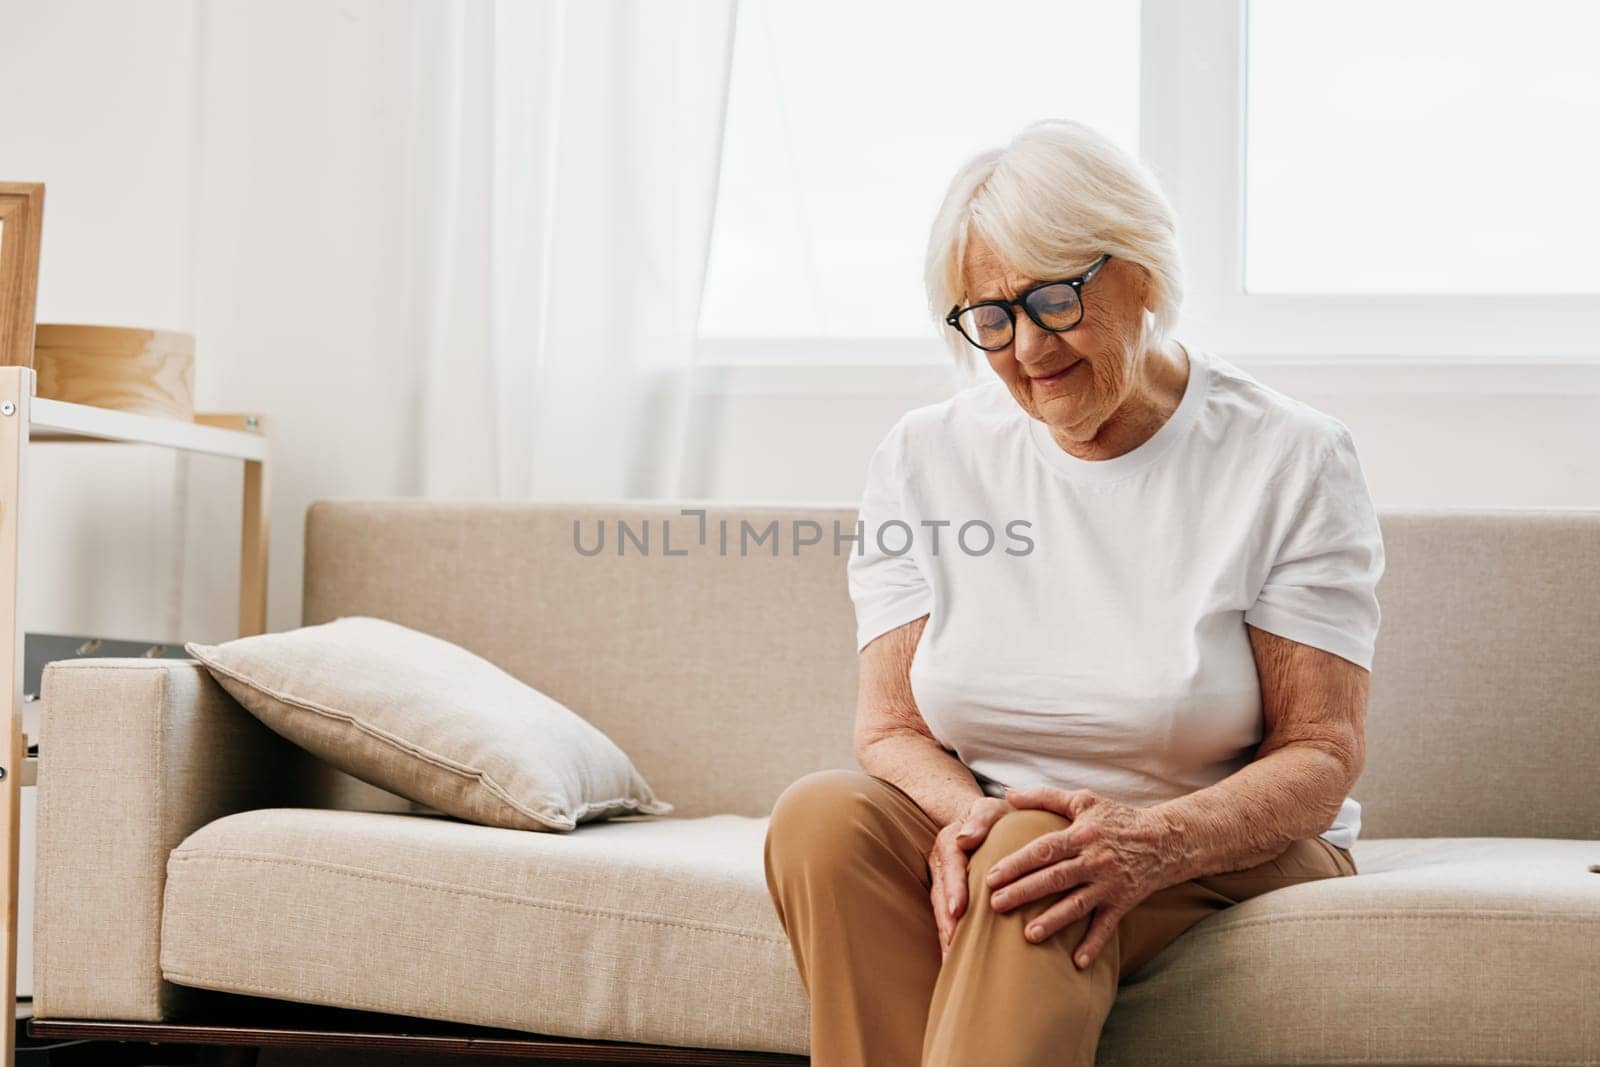 Elderly woman severe pain in her leg sitting on the couch, health problems in old age, poor quality of life. Grandmother with gray hair holds on to her sore knee, problems with joints and ligaments. High quality photo